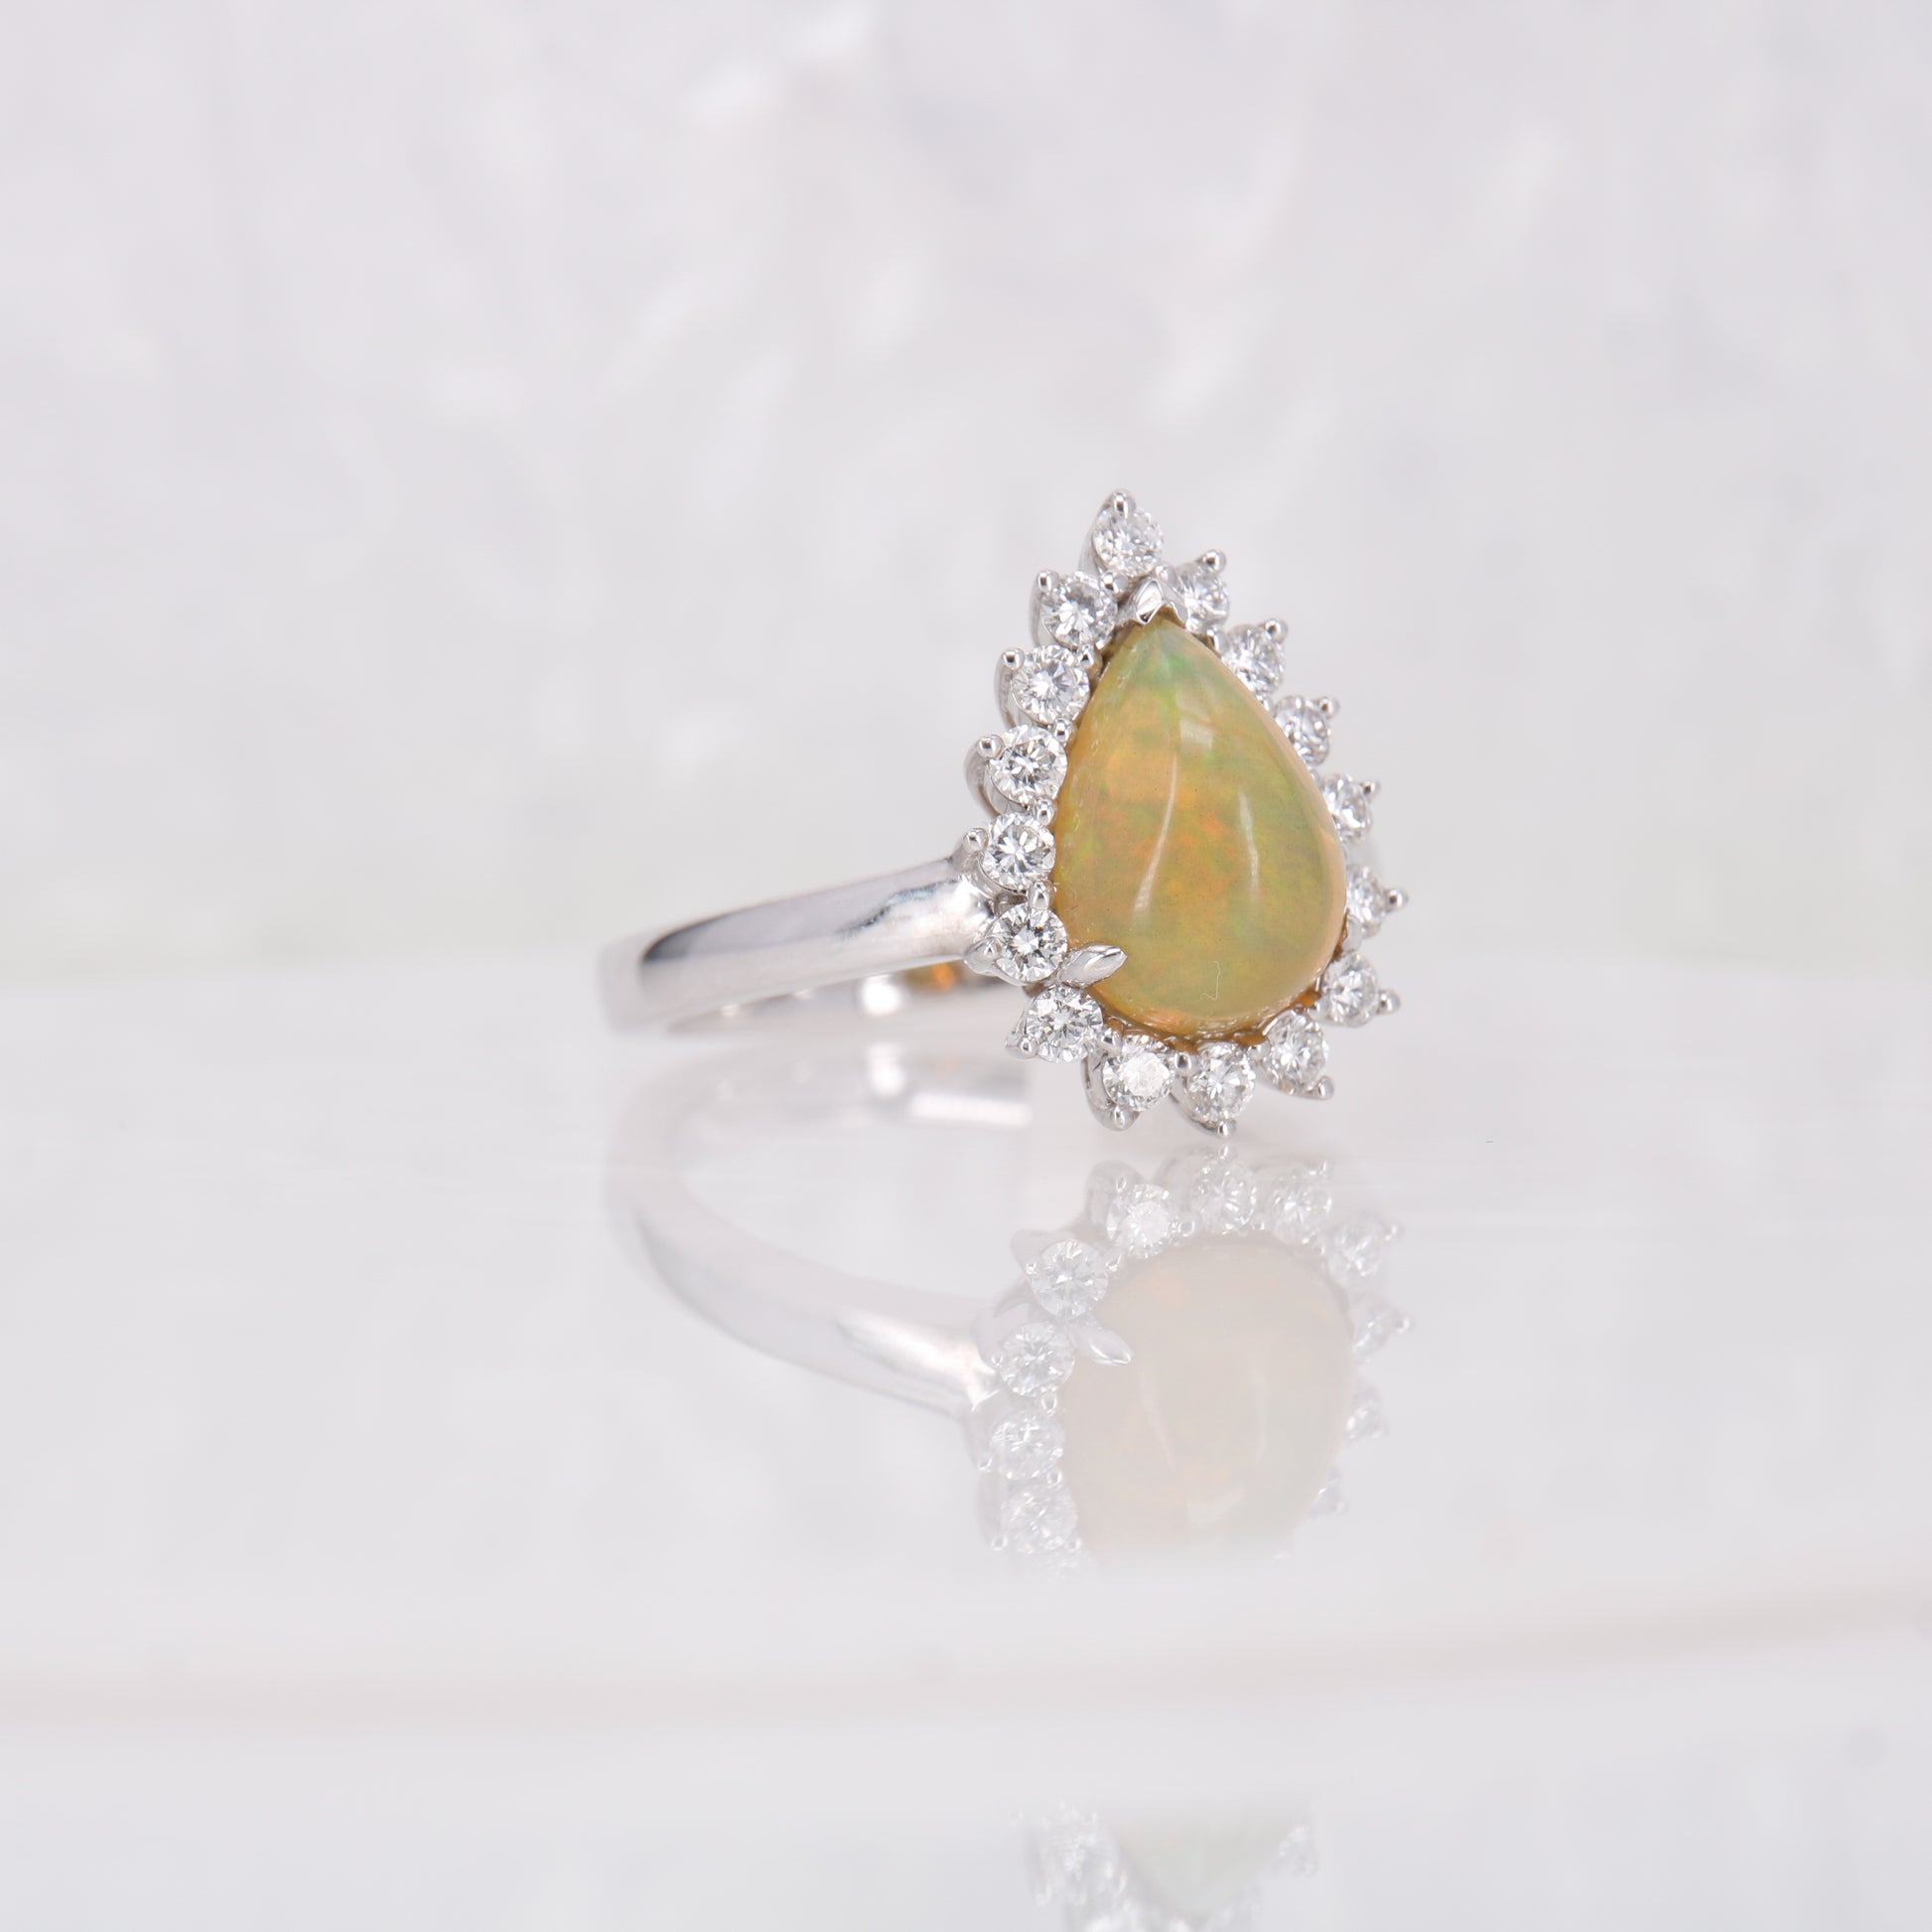 Opal and Diamond Ring. Pear cut opal surrounded by a halo of round brilliant diamonds.